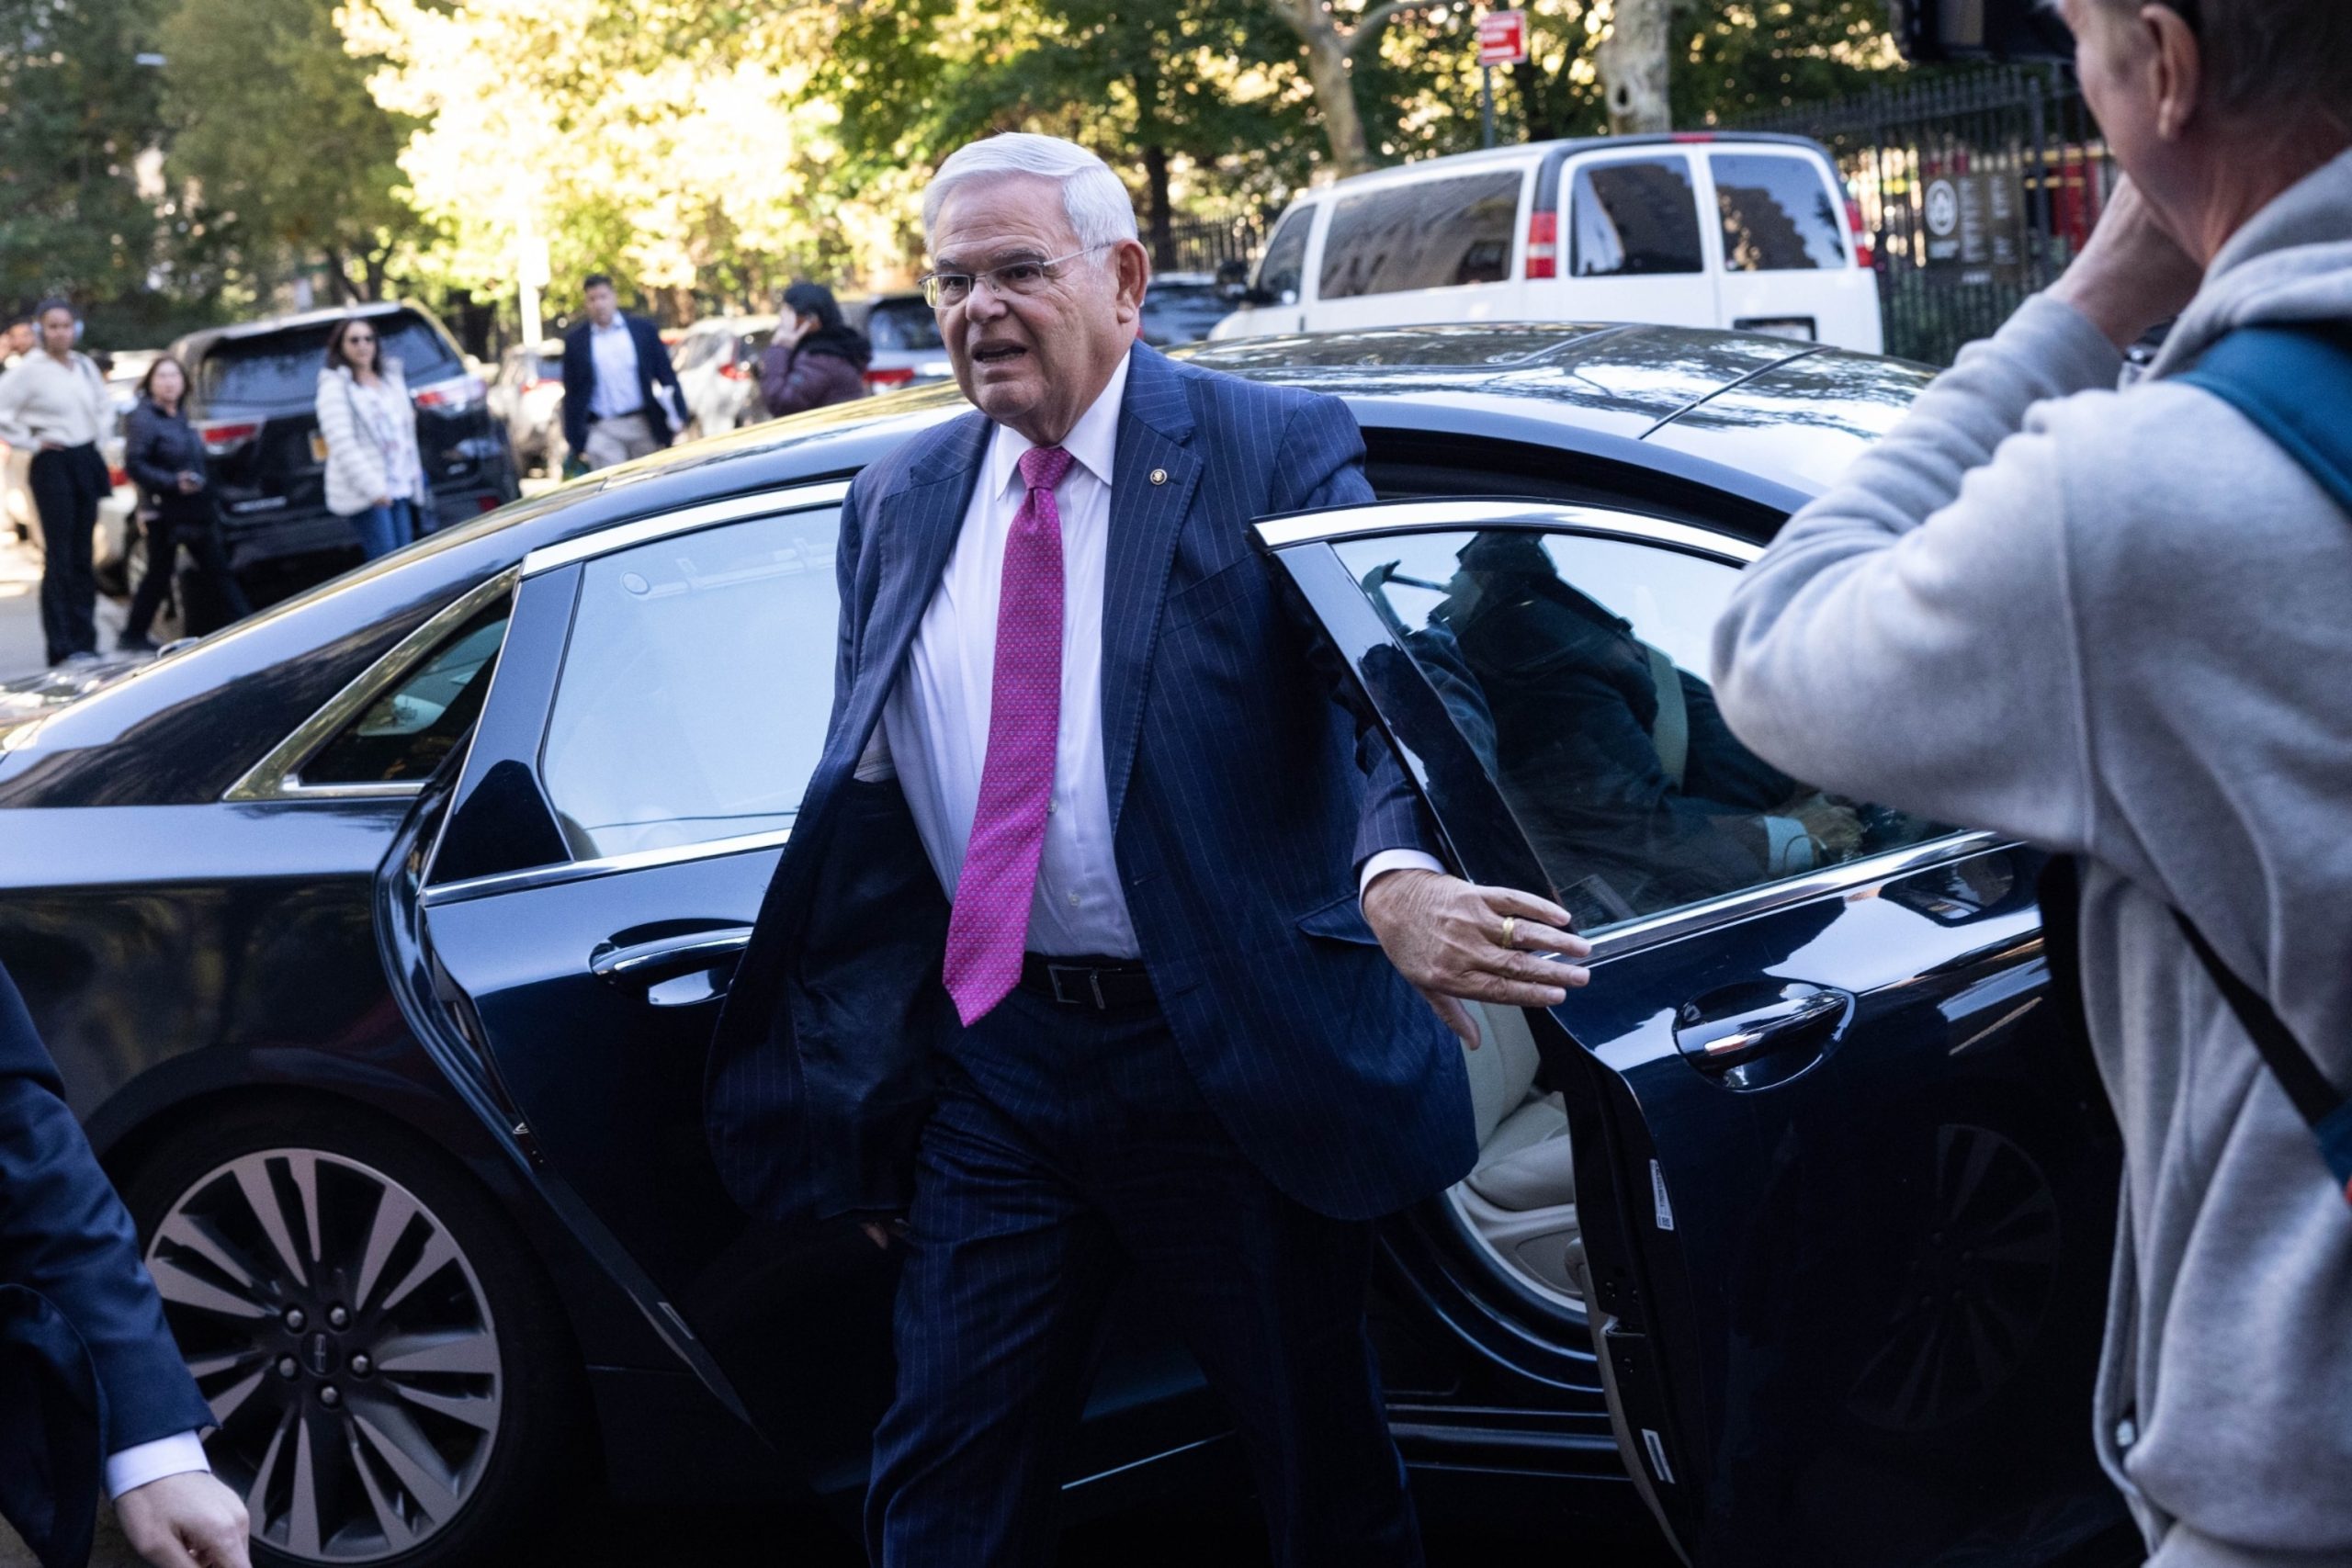 Senator Bob Menendez and his wife are facing new obstruction charges in a bribery case